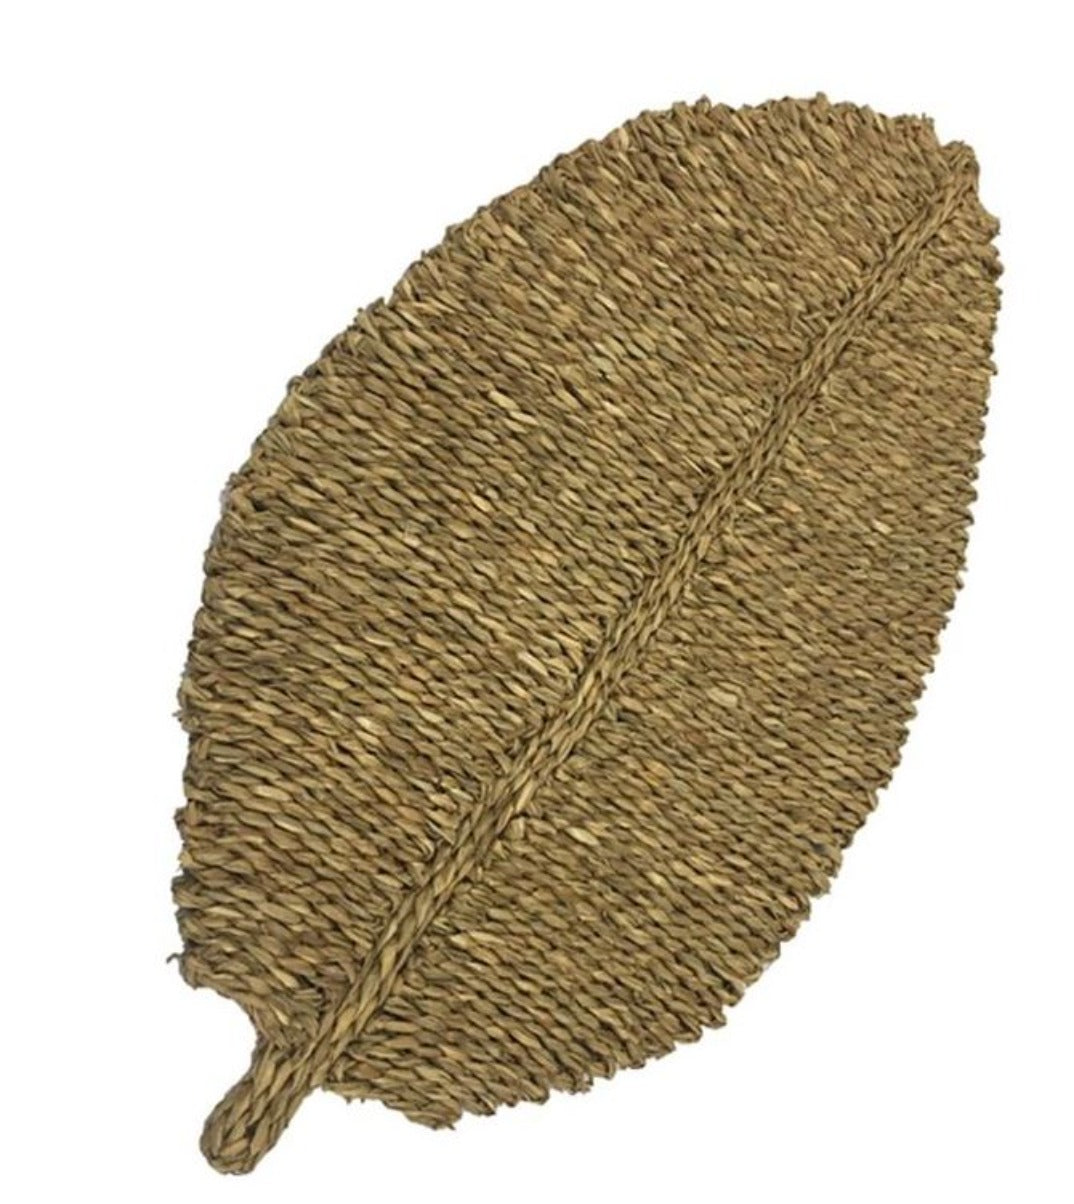 Seagrass Woven Leaf